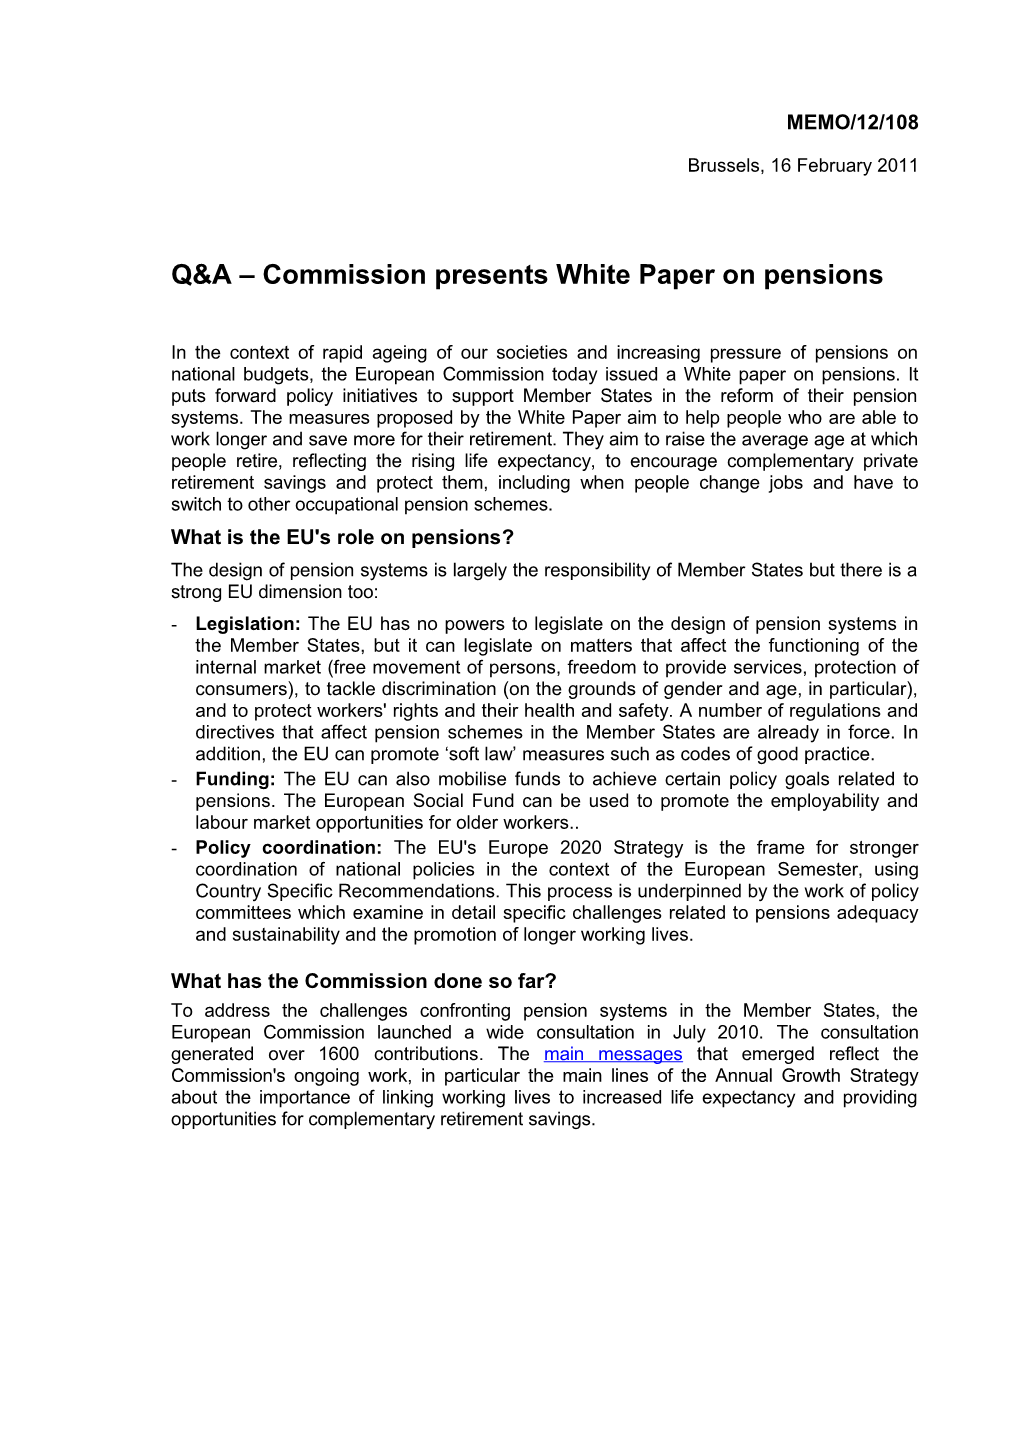 Q&A Commission Presents White Paper on Pensions